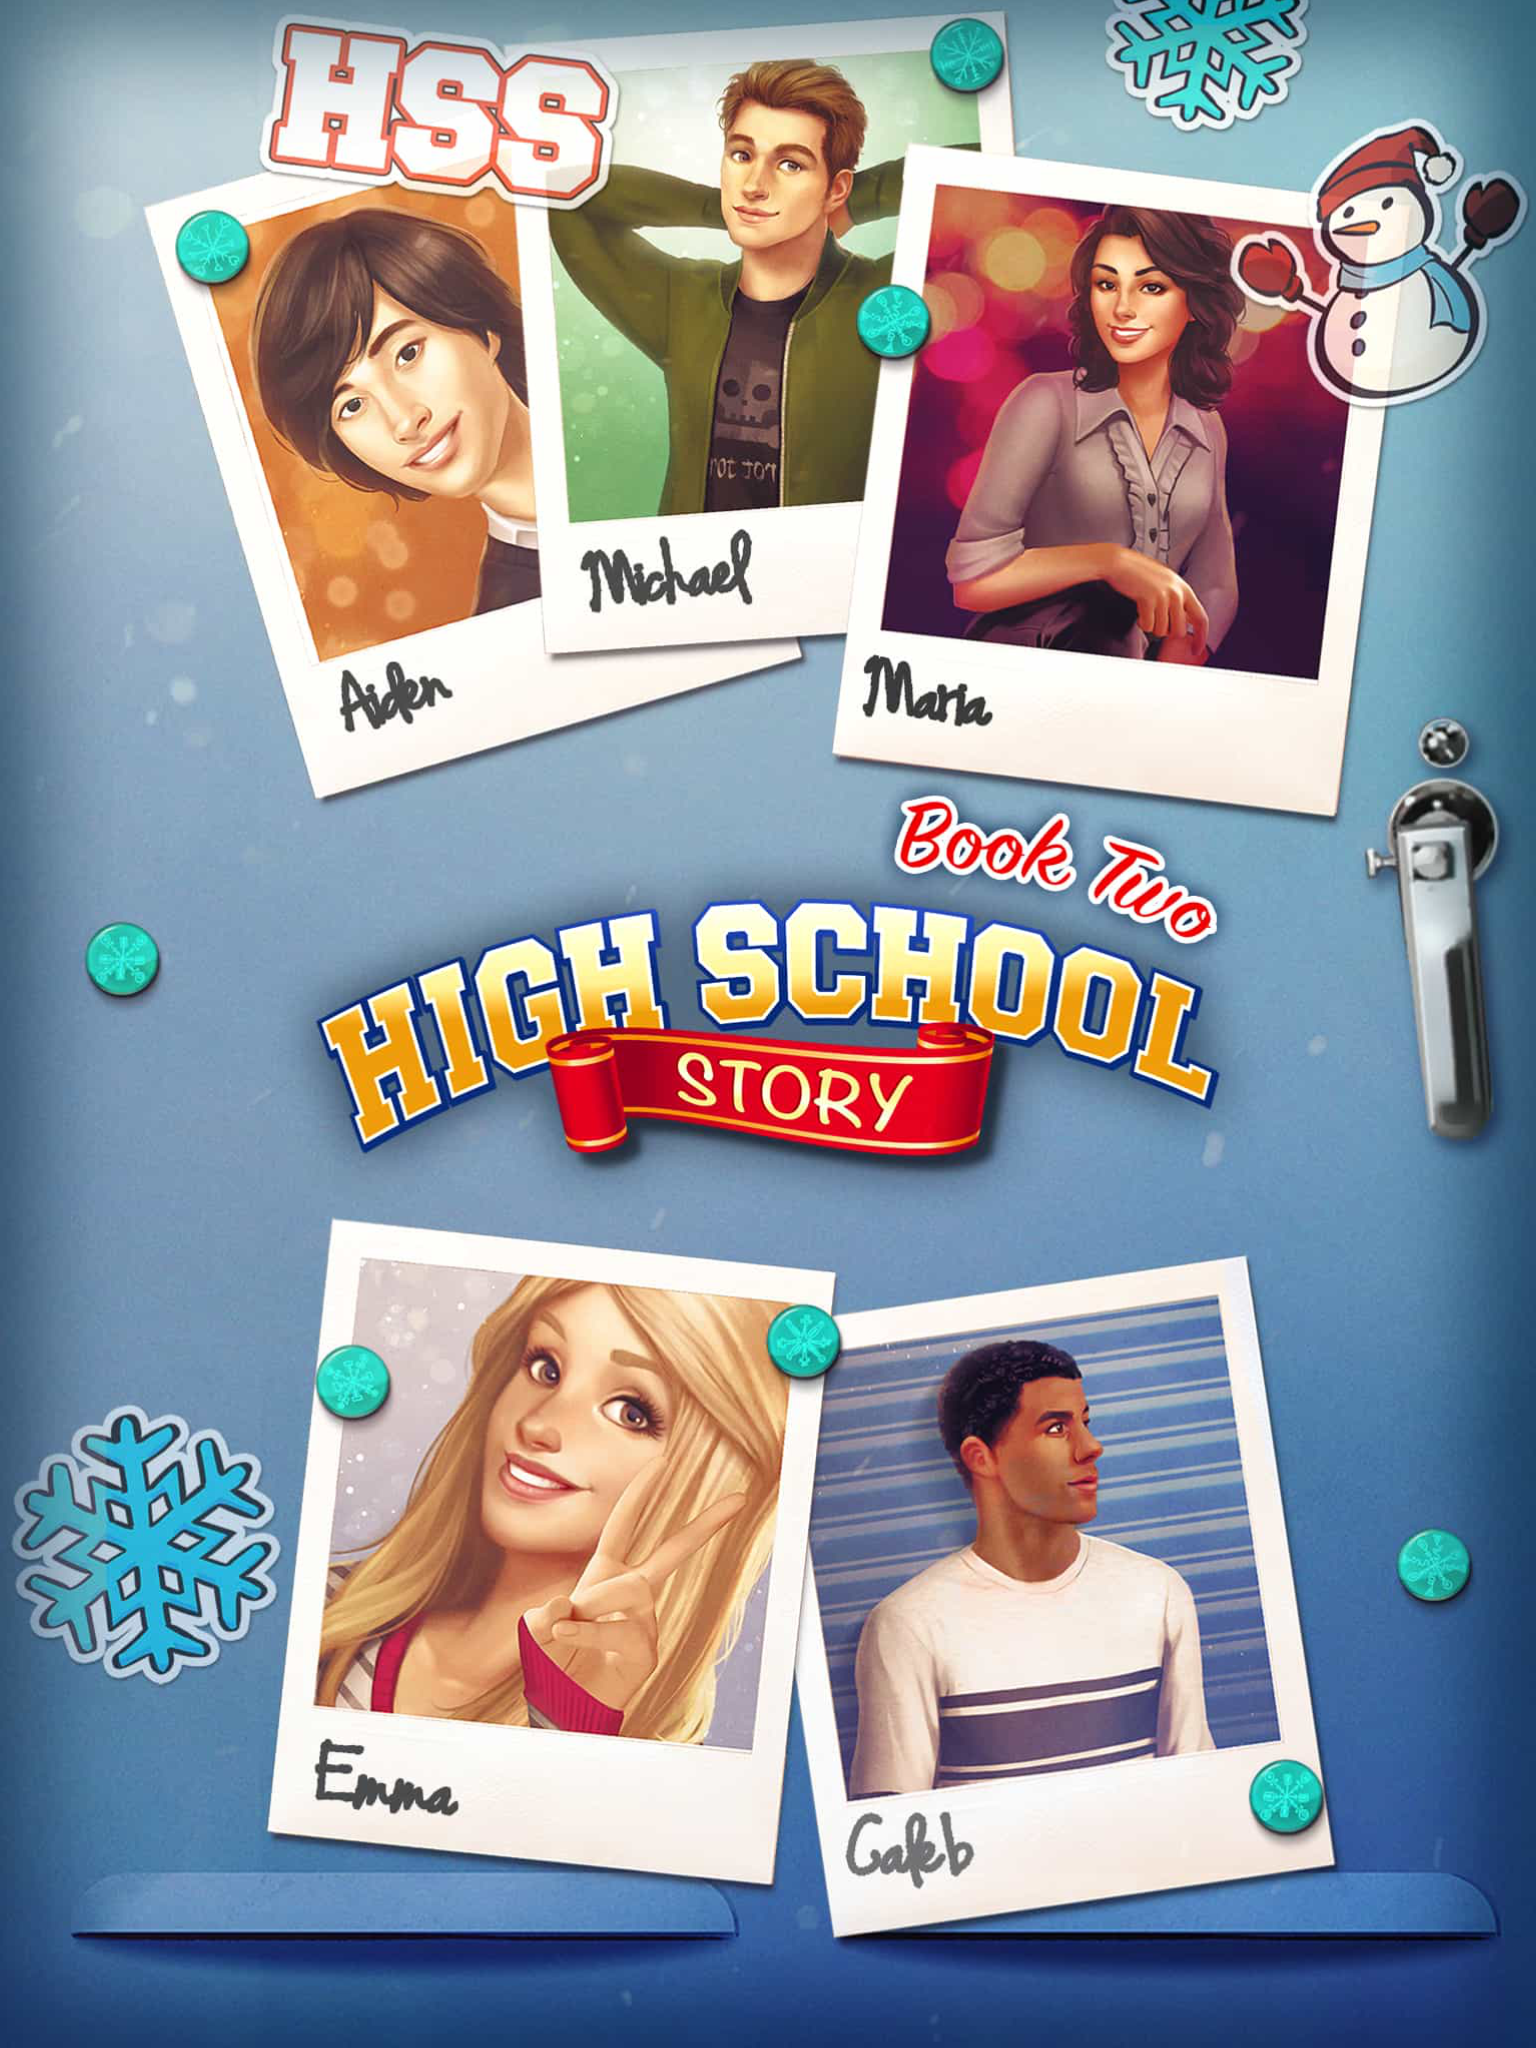 high-school-story-book-2-choices-choices-stories-you-play-wikia-fandom-powered-by-wikia